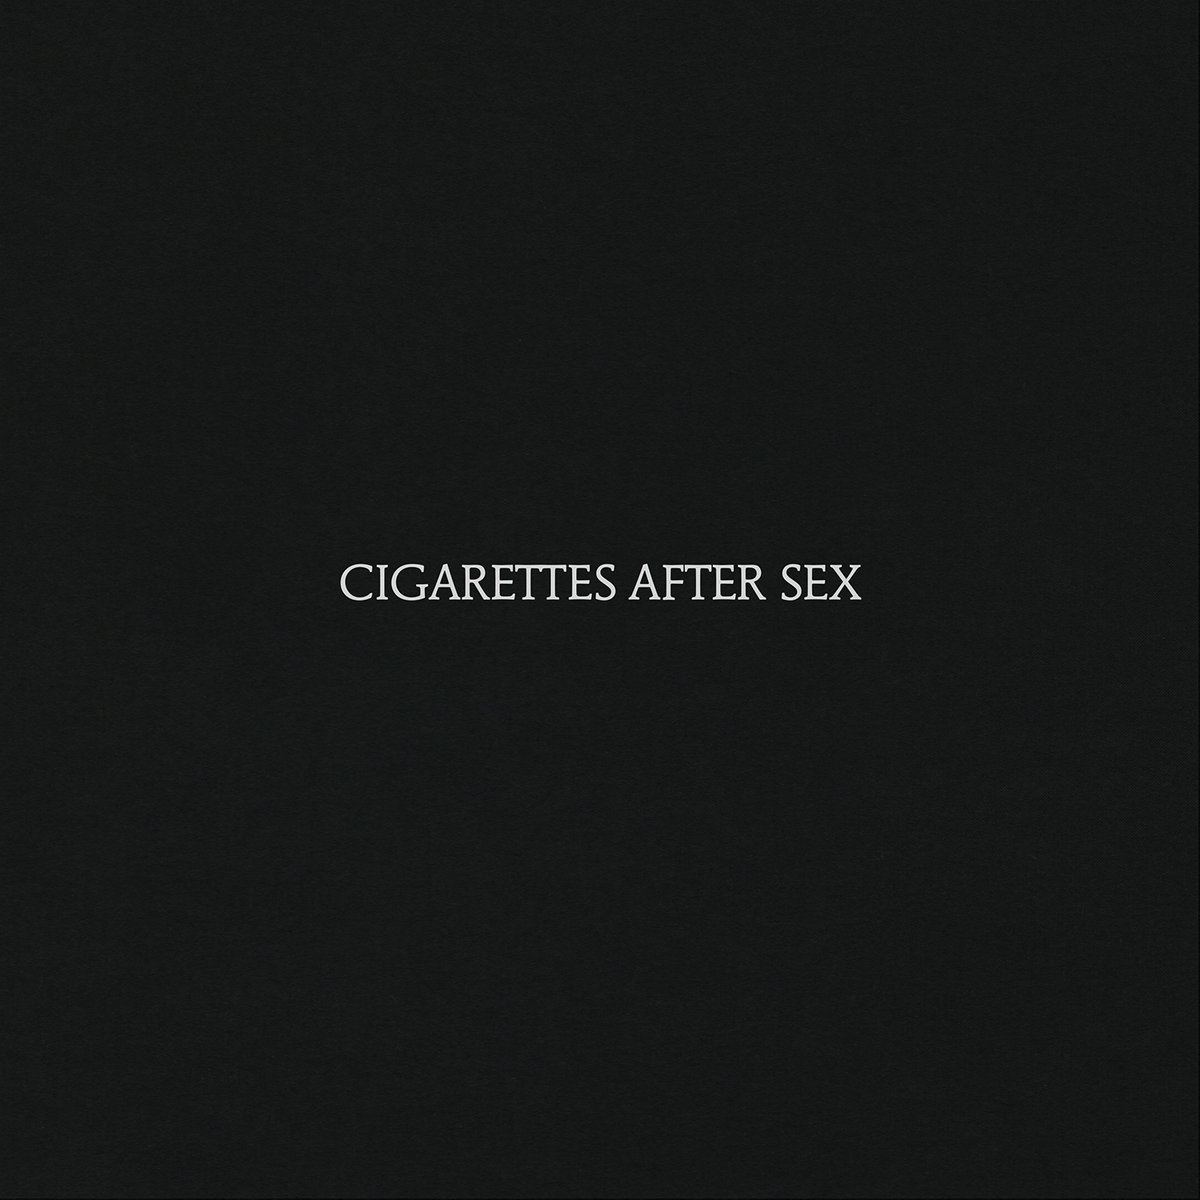 Album Review Cigarettes After Sex By Cigarettes After Sex The Line